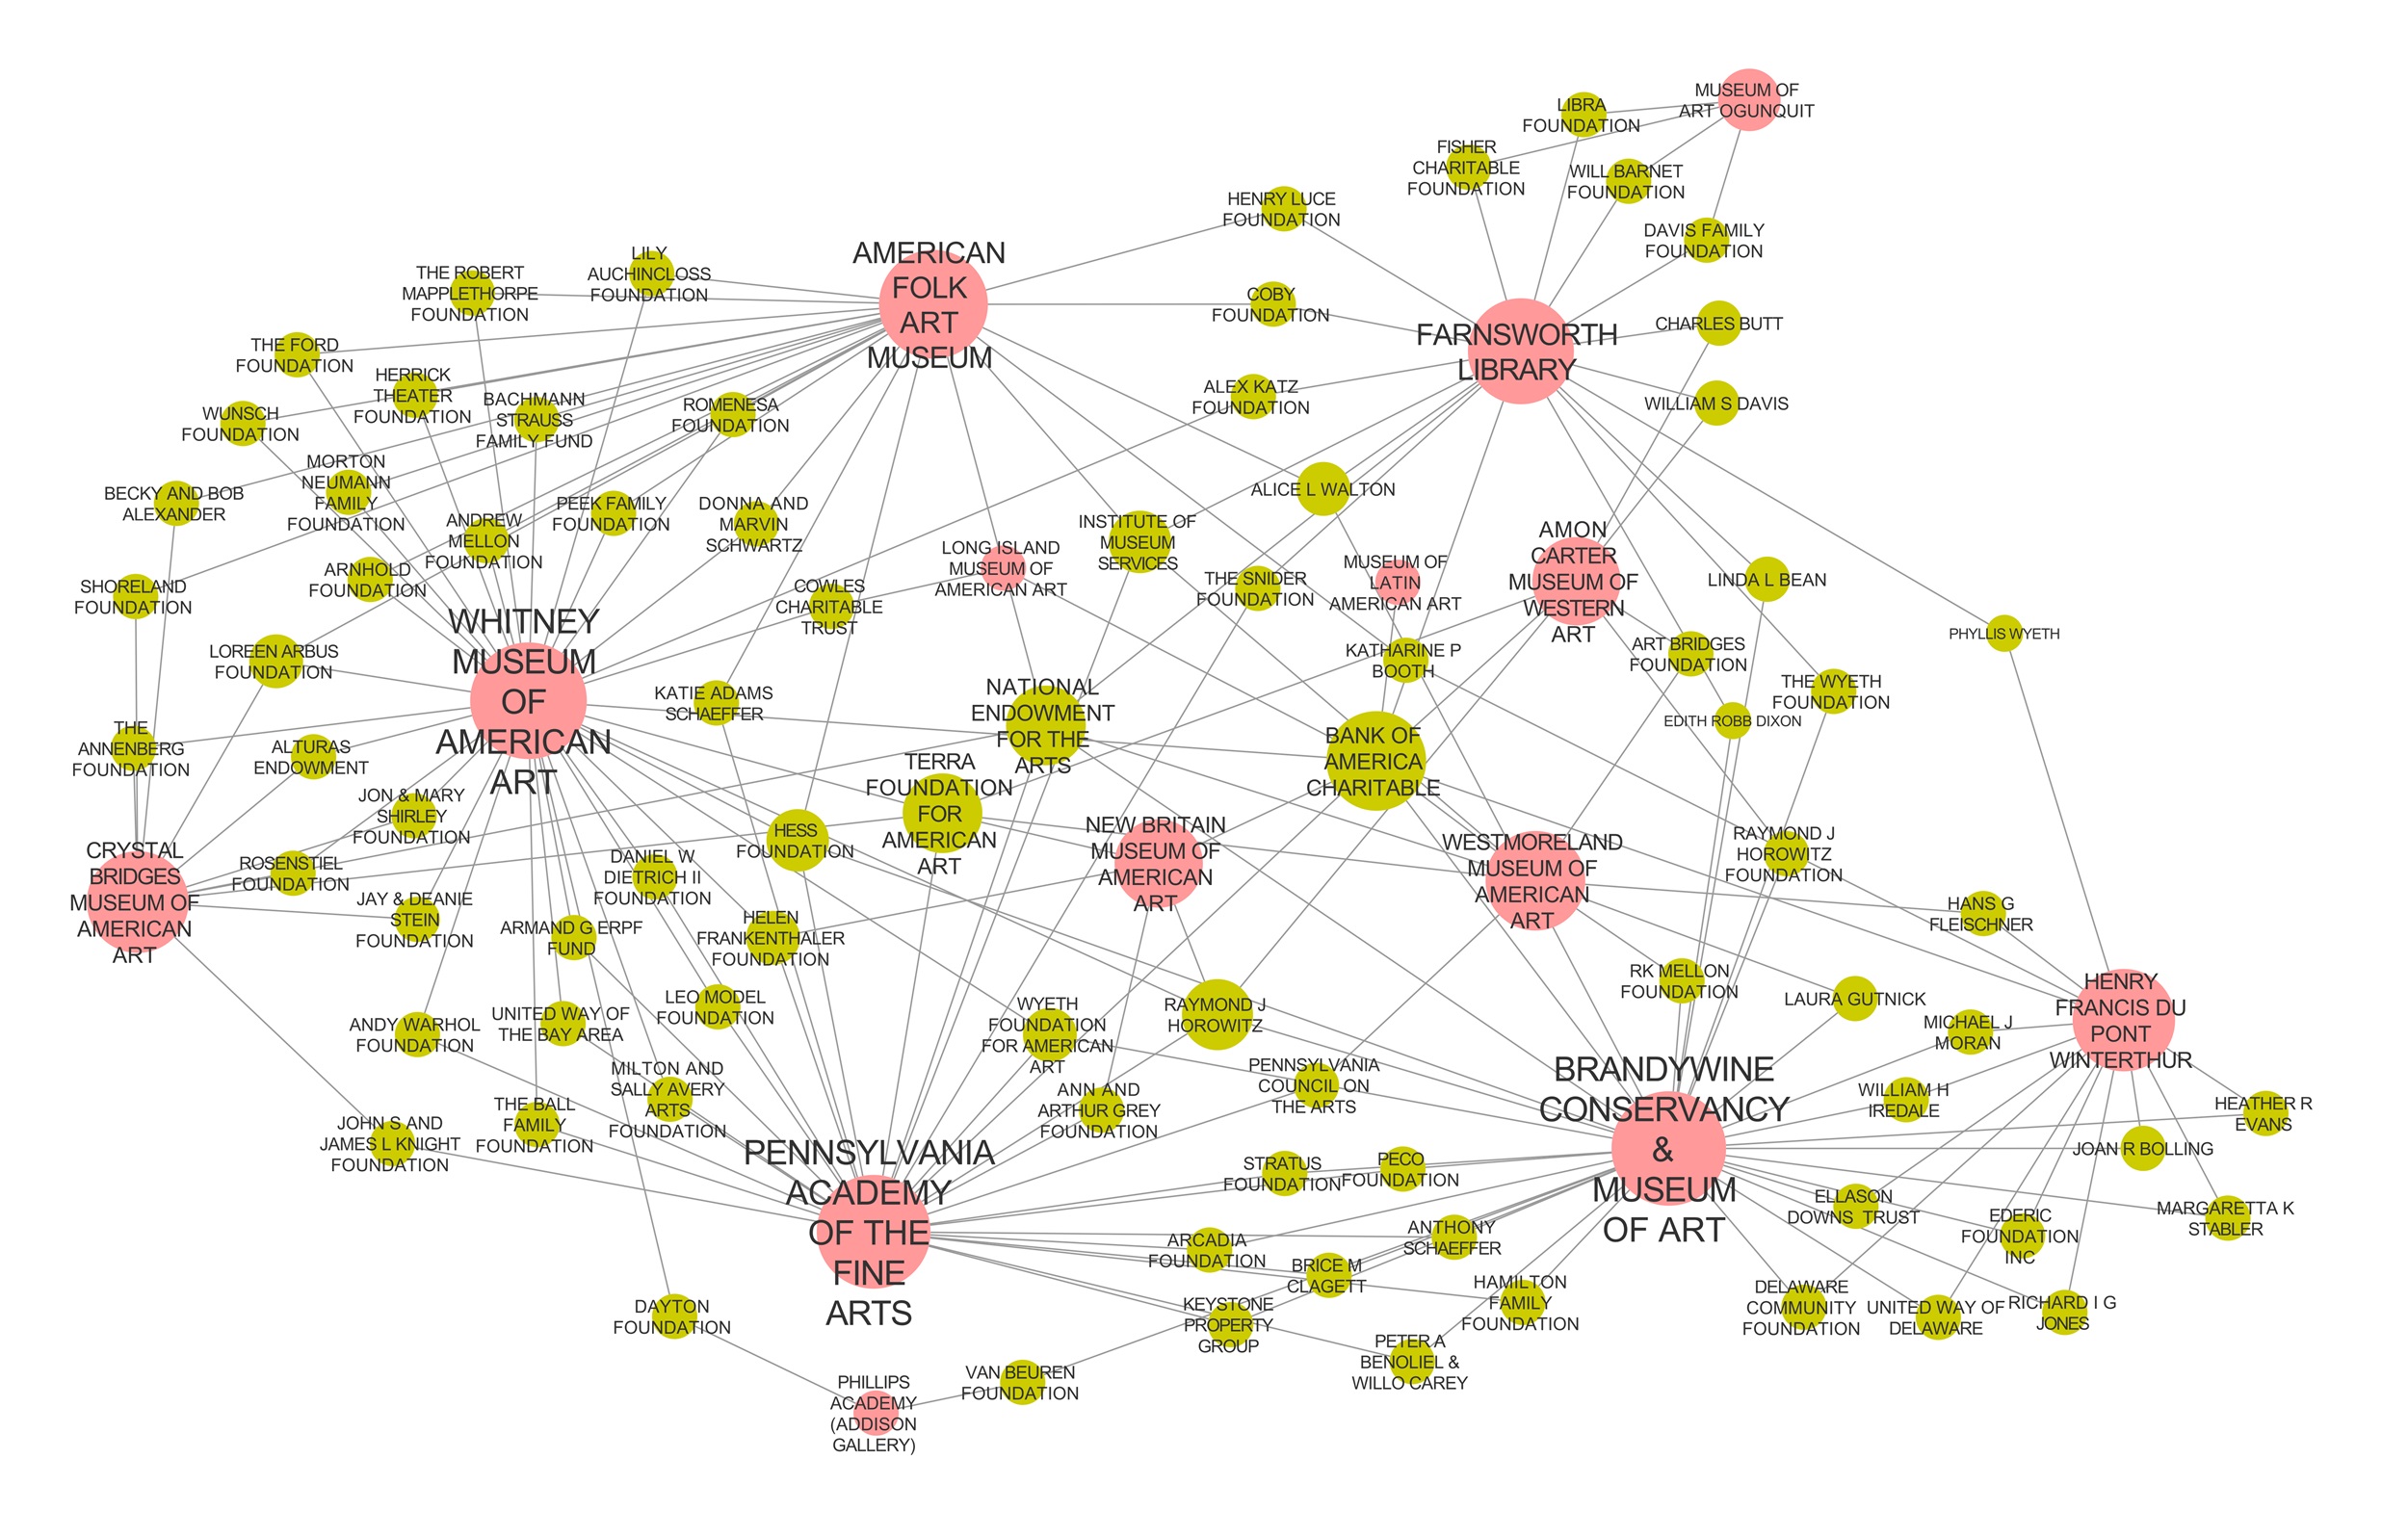 Network map showing yellow-green circles representing major donors with lines connecting them to salmon-pink circles representing art museums